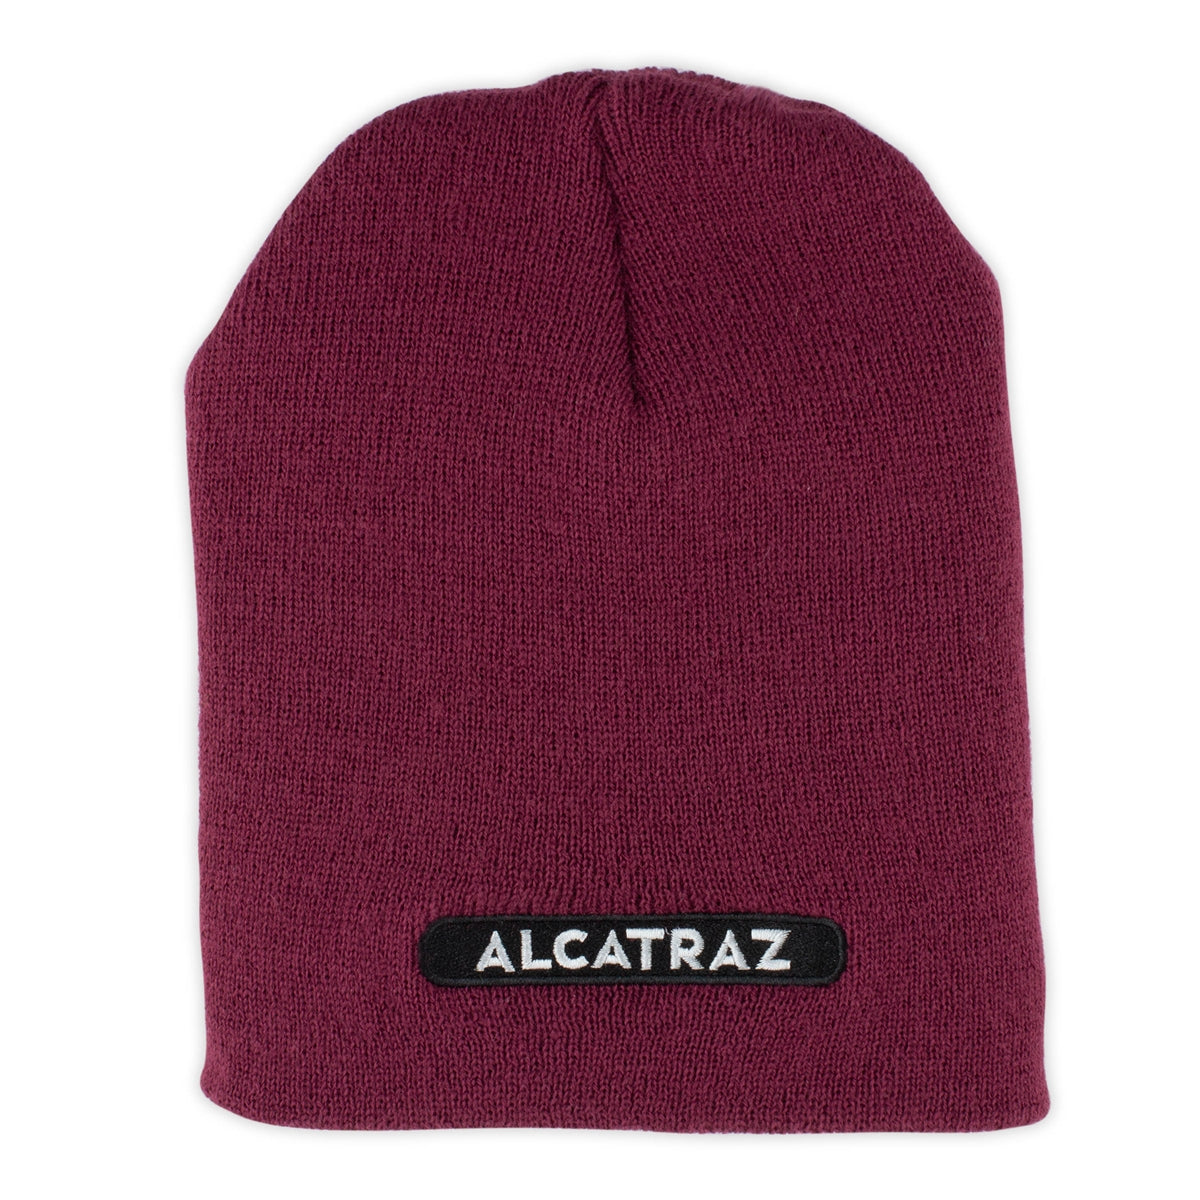 Maroon knit cap with white and black patch at brim that reads "Alcatraz."